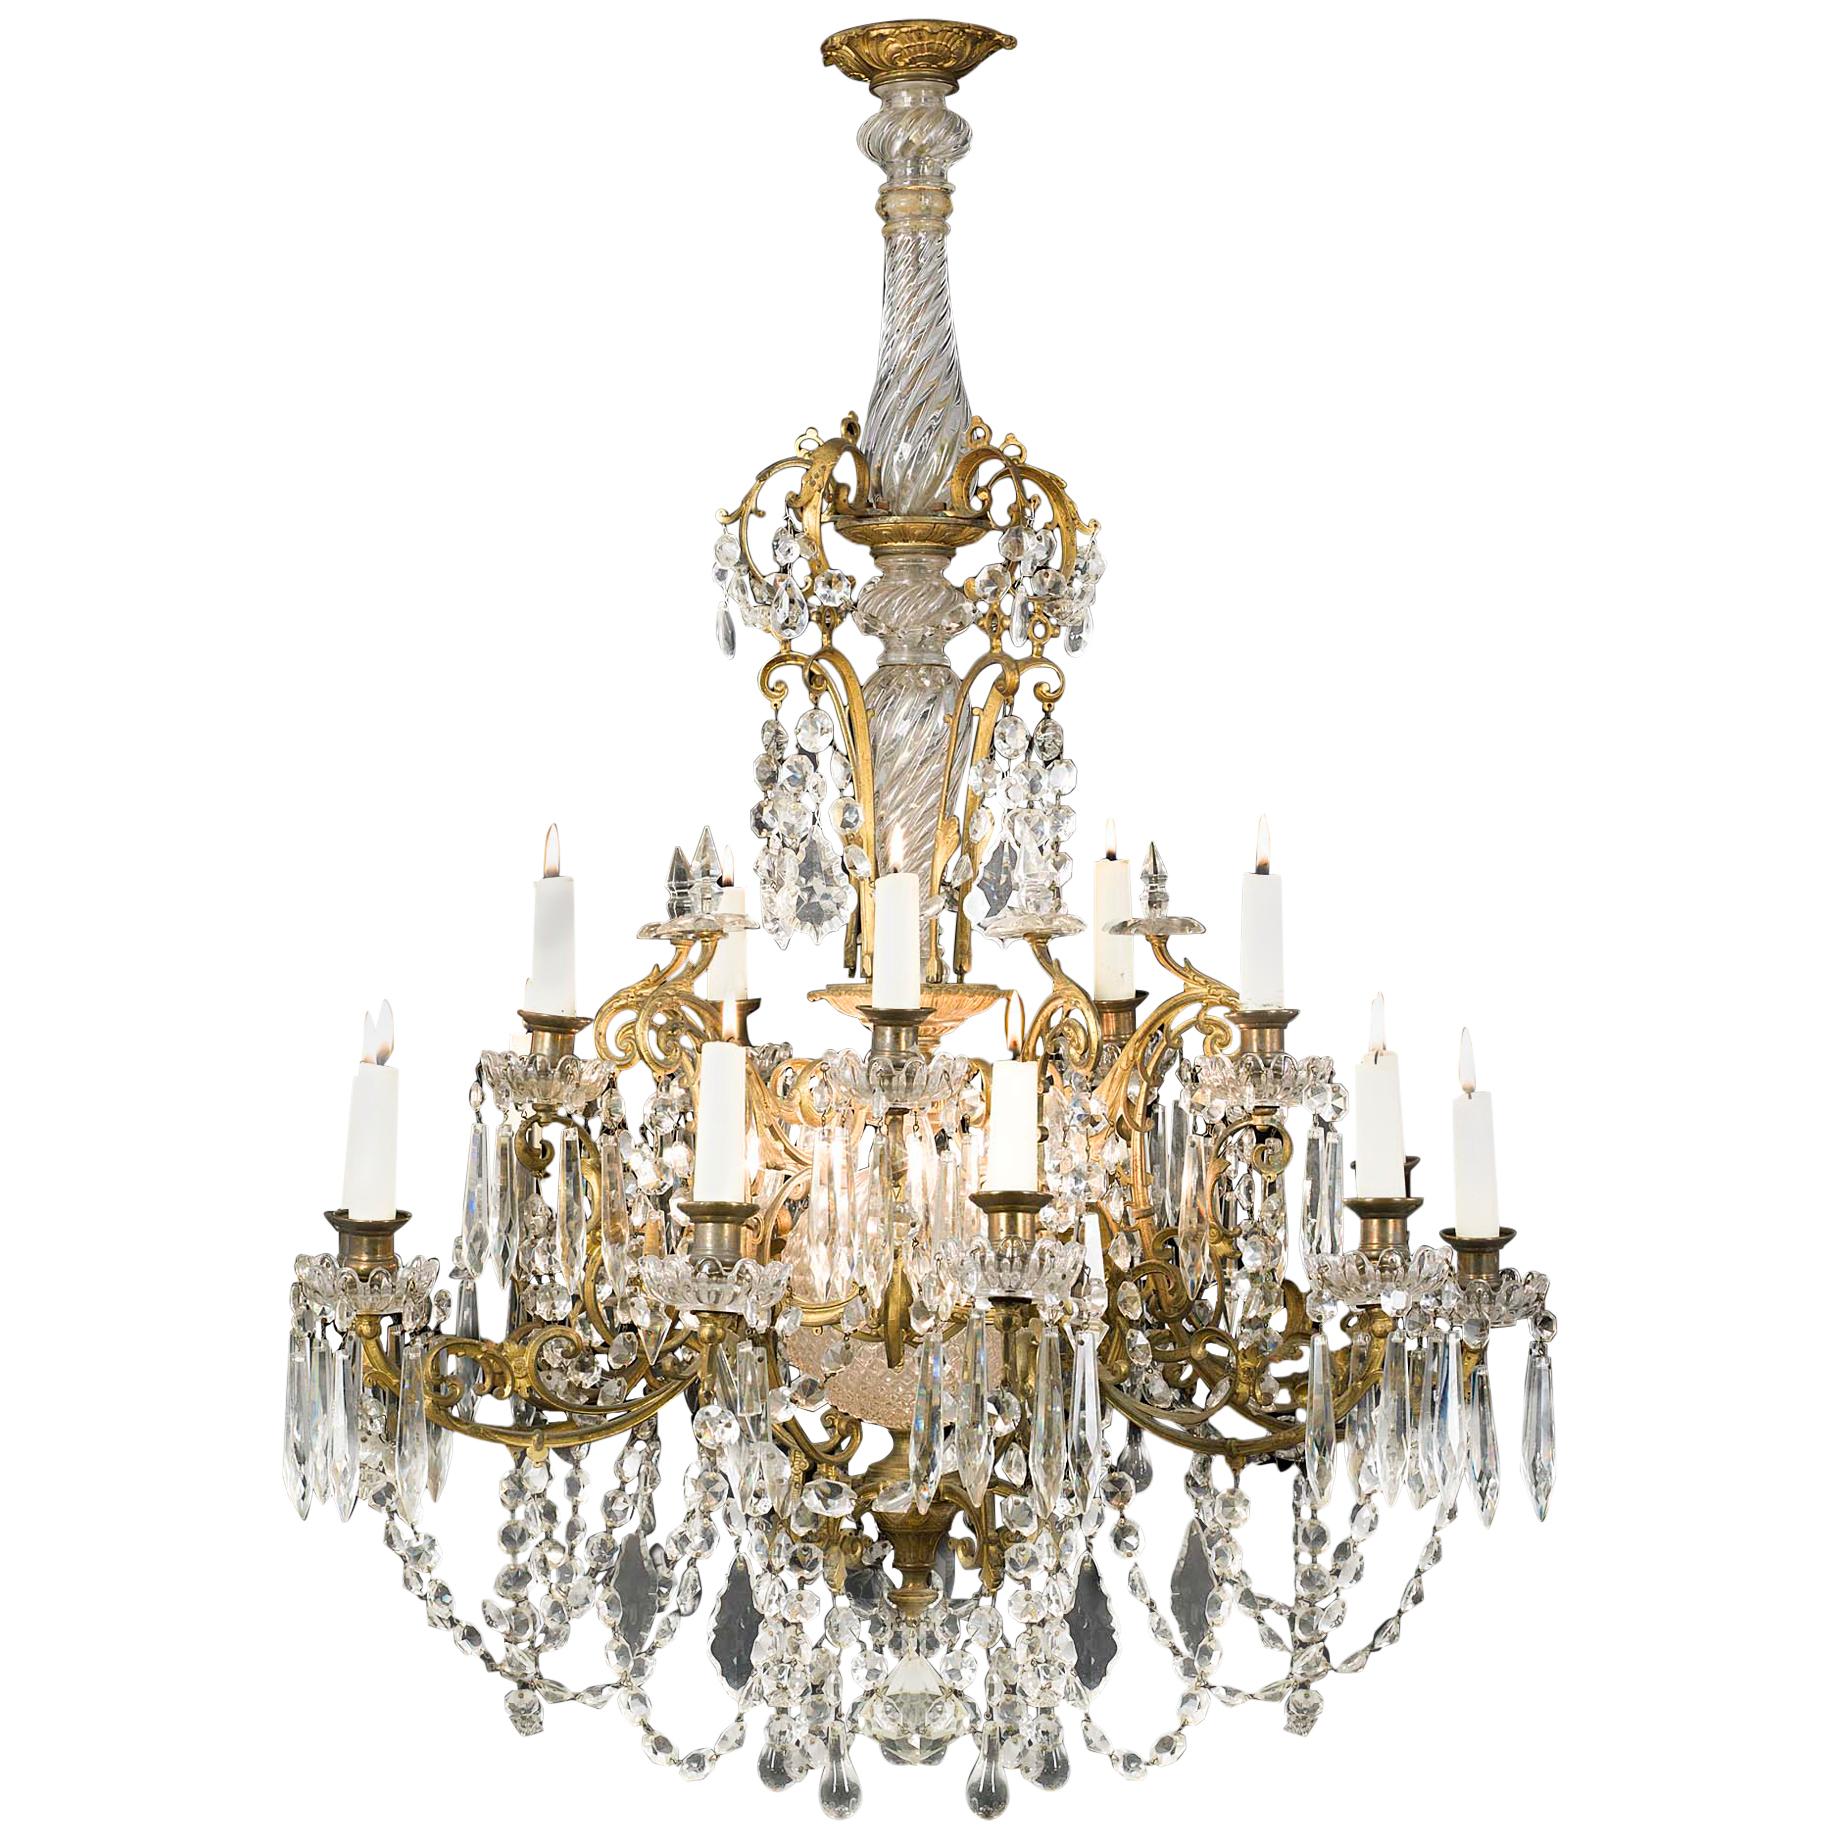 20th Century Neoclassical Style Fifteen Candle Chandelier